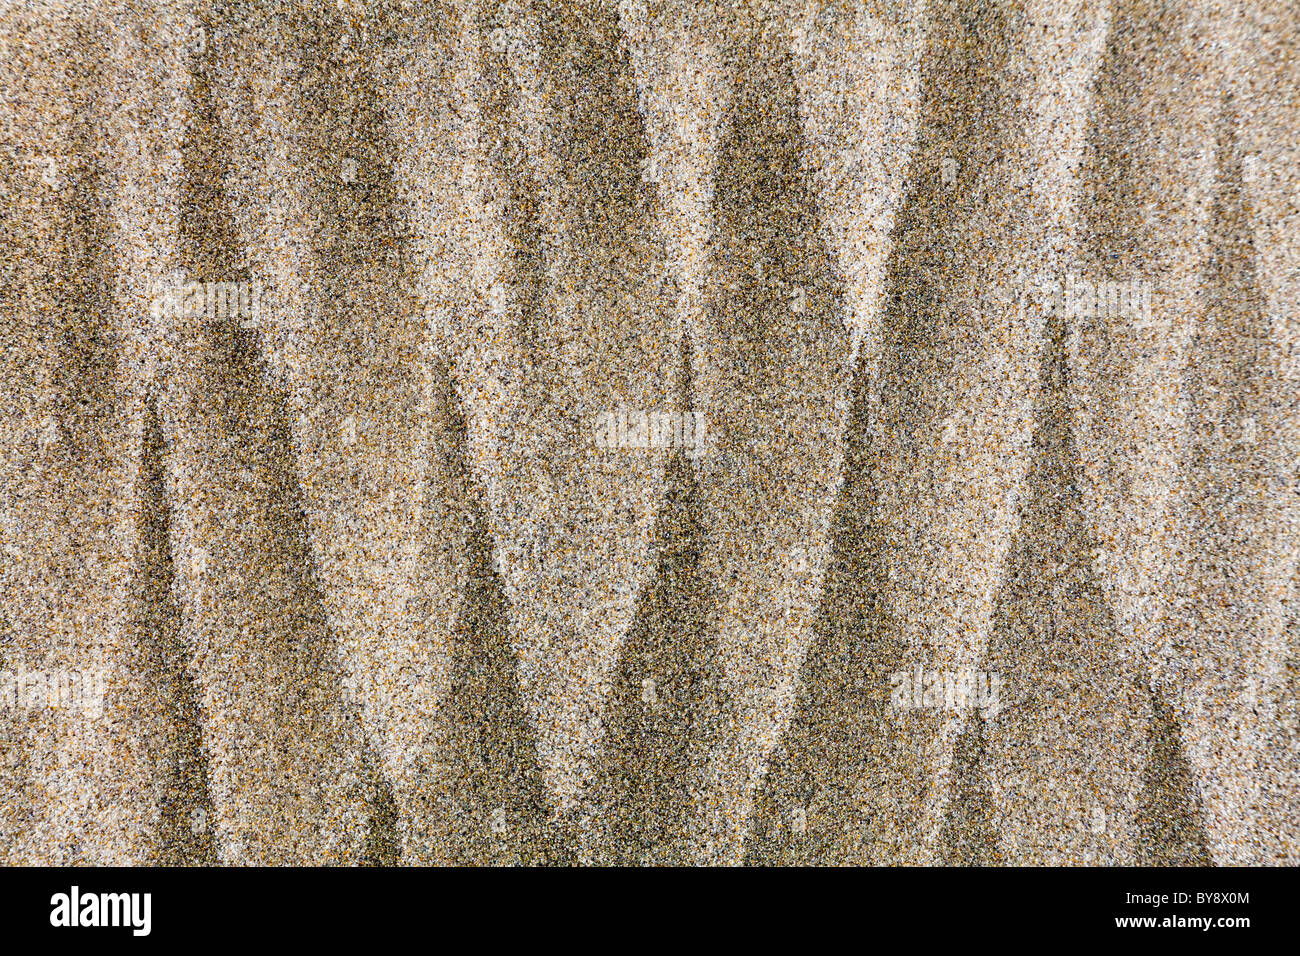 USA; Oregon Coast; Devil's Punchbowl State Natural Area; patterns in beach sand Stock Photo